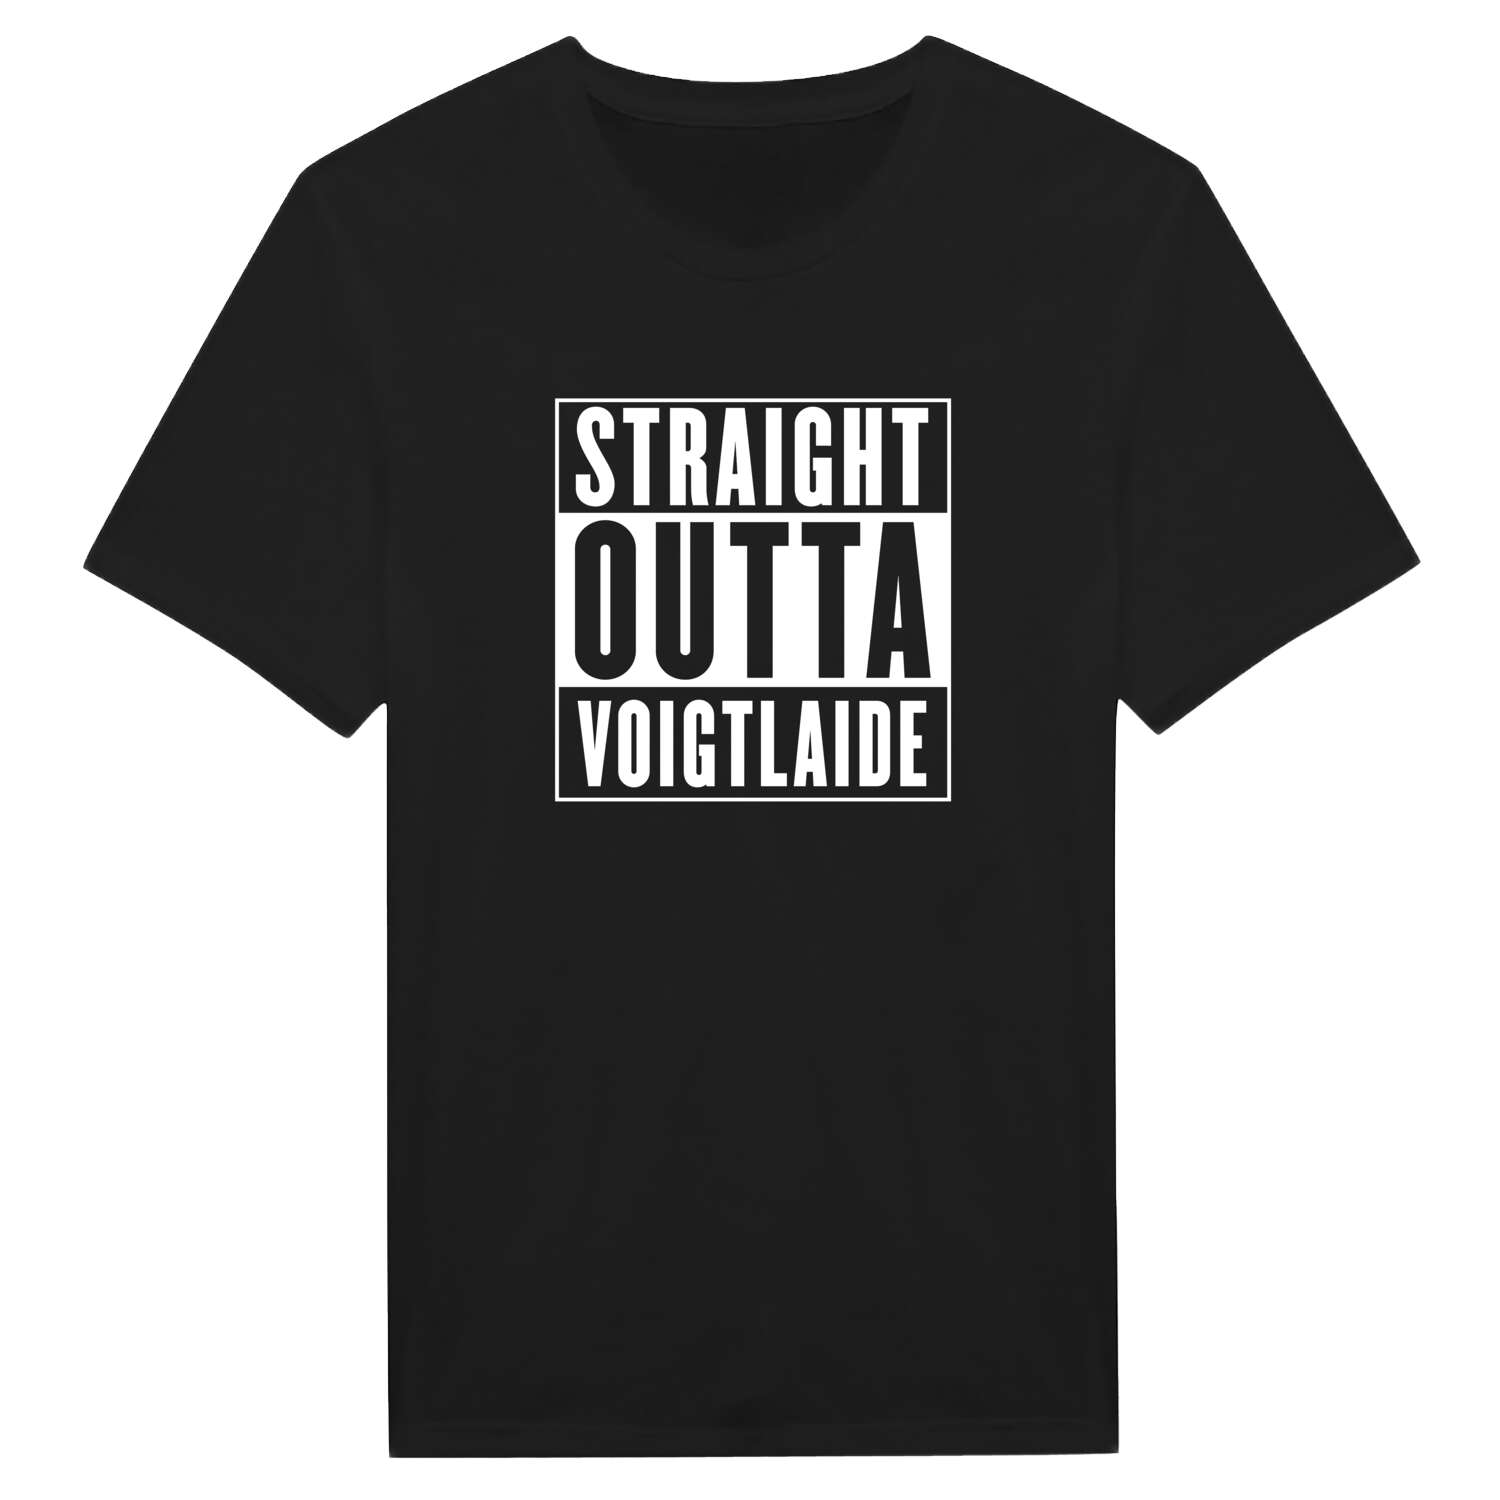 Voigtlaide T-Shirt »Straight Outta«